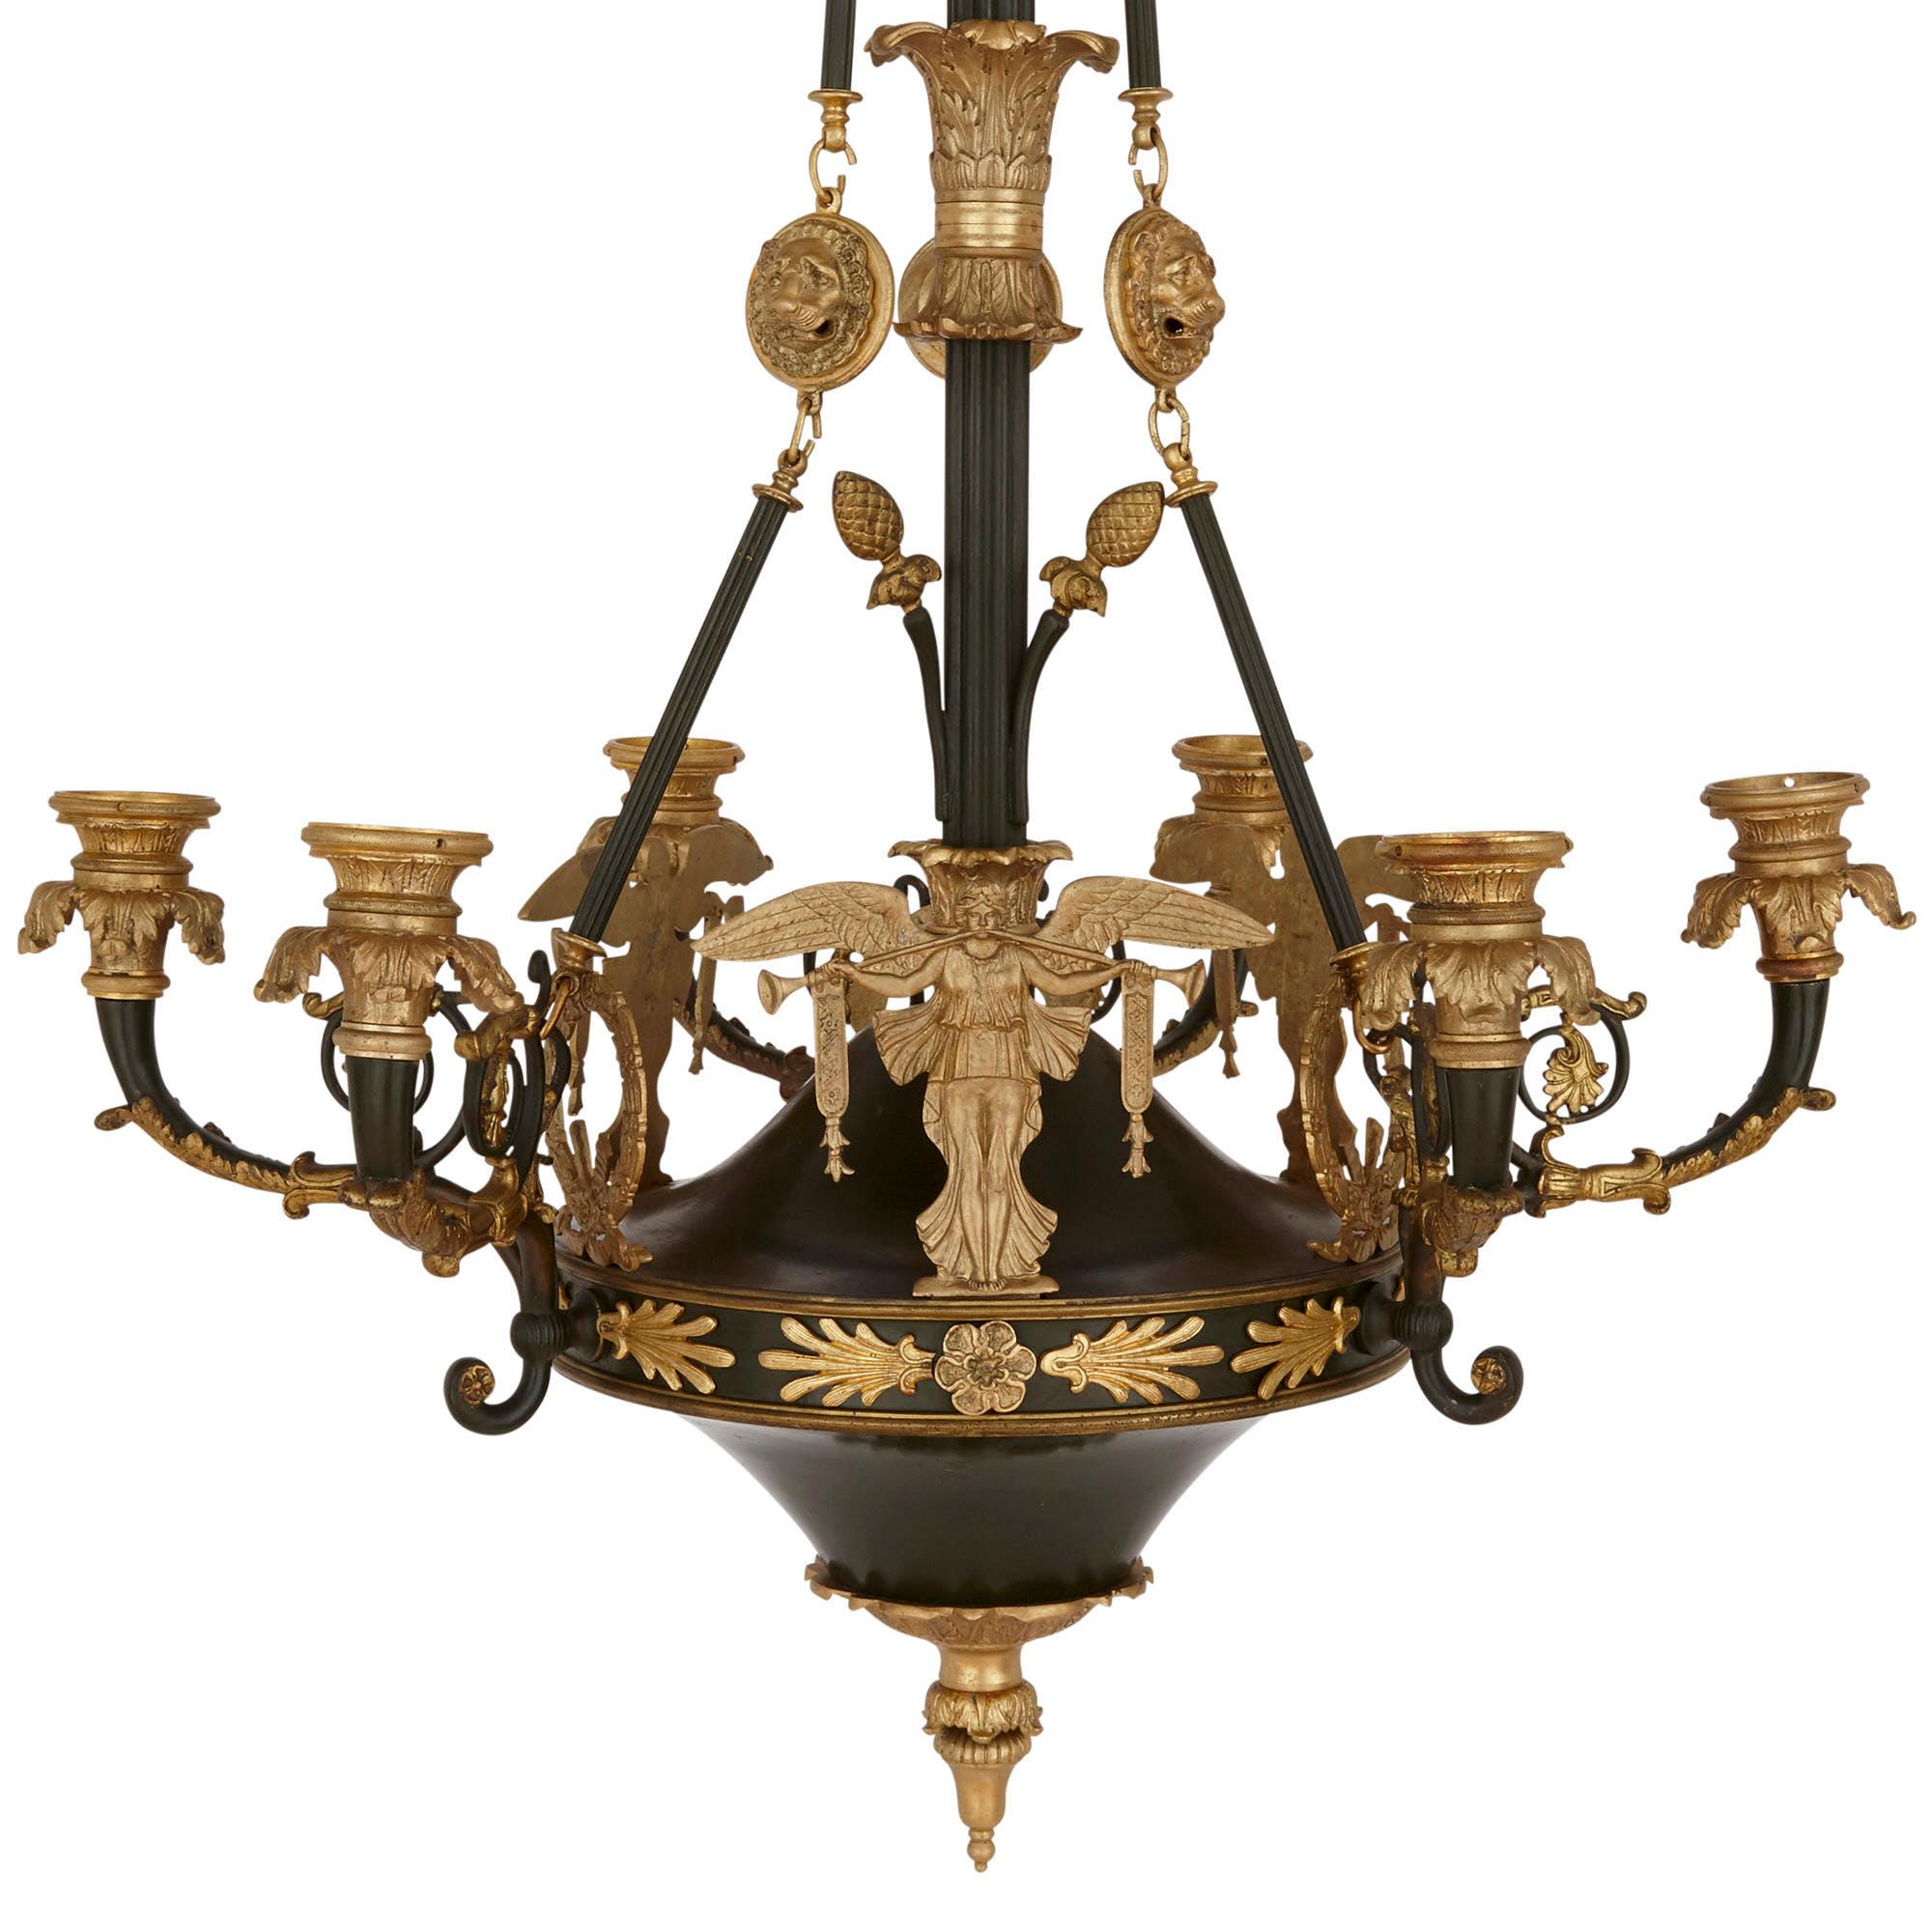 French Empire style ormolu and bronze chandelier
French, 19th century
Measures: Height 100cm, diameter 64cm

This chandelier is a beautiful example of the Empire style. The chandelier is crafted from bronze, which has been both gilt and